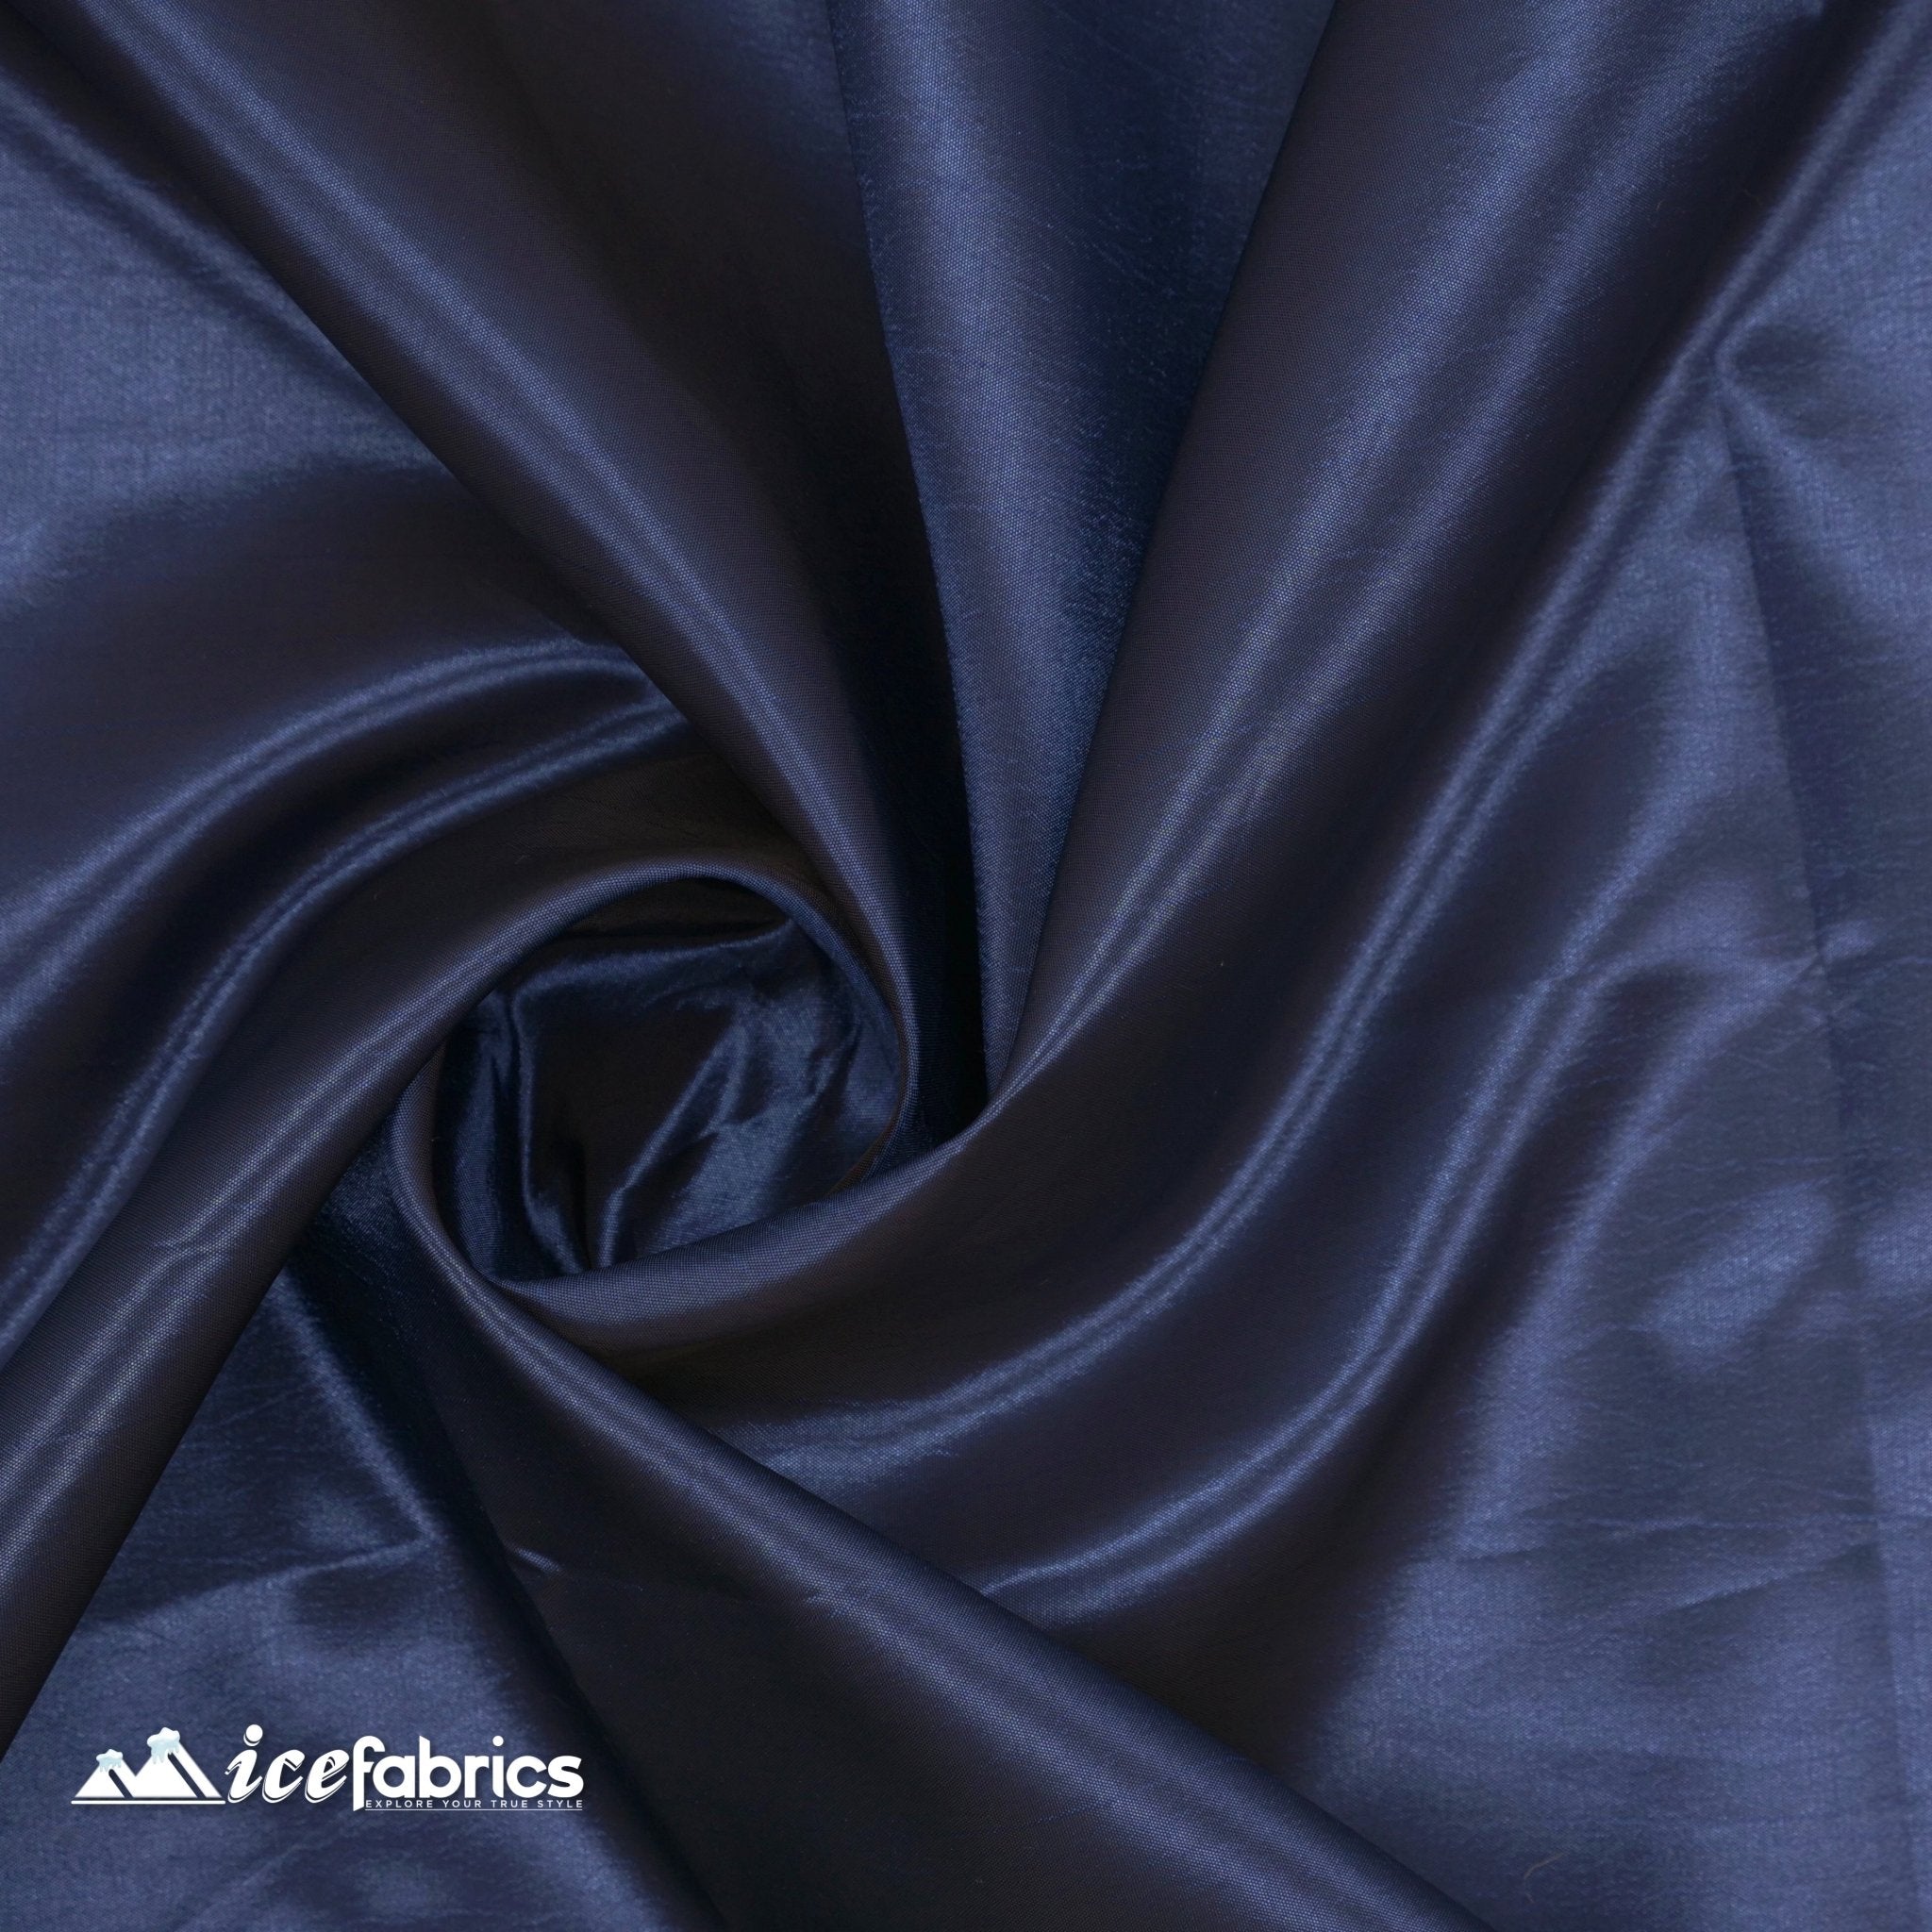 High Quality Solid Taffeta Fabric_ 60" Width_ By The YardTaffeta FabricICEFABRICICE FABRICSNavy blueHigh Quality Solid Taffeta Fabric_ 60" Width_ By The YardTaffeta FabricICEFABRICICE FABRICSNavy blueHigh Quality Solid Taffeta Fabric_ 60" Width_ By The Yard ICEFABRIC Navy blue